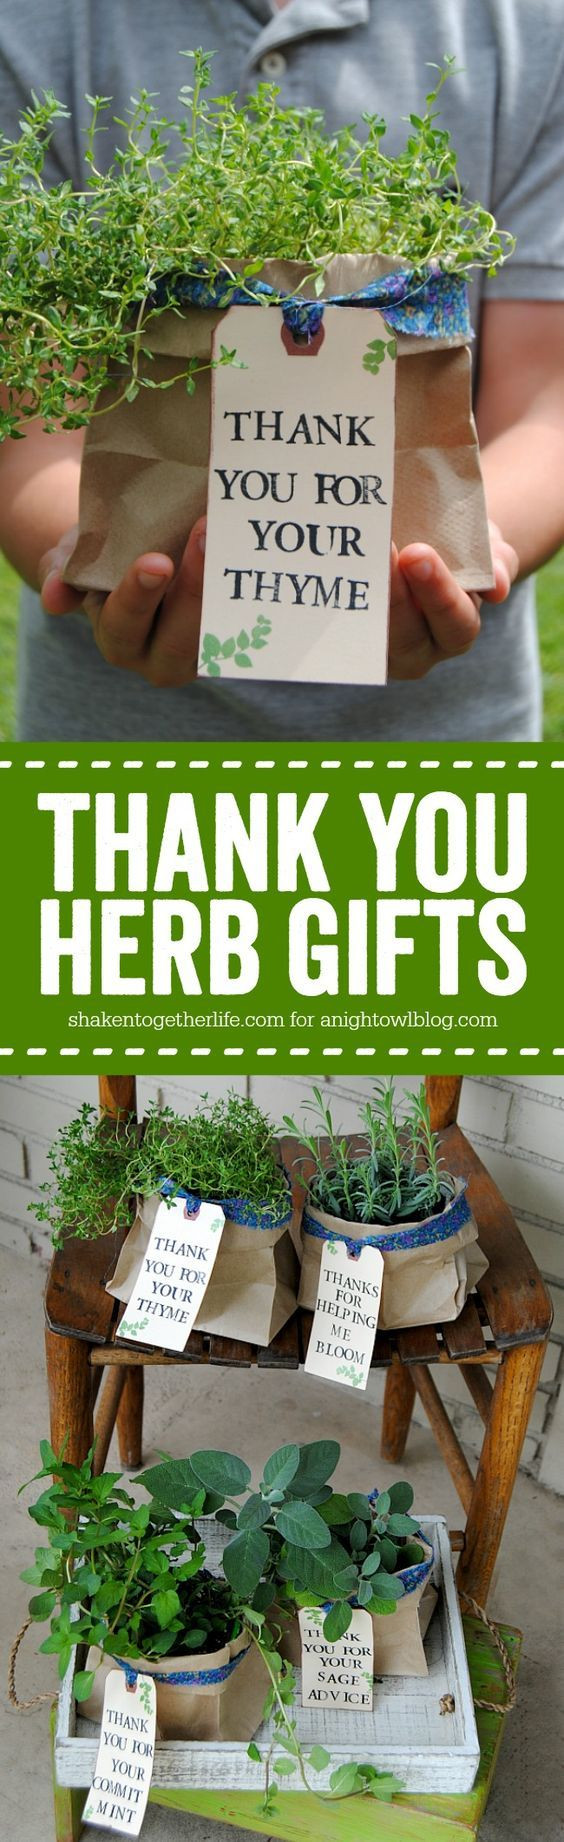 Thank You Gift Ideas For Neighbors
 The 25 best Thank you ts ideas on Pinterest